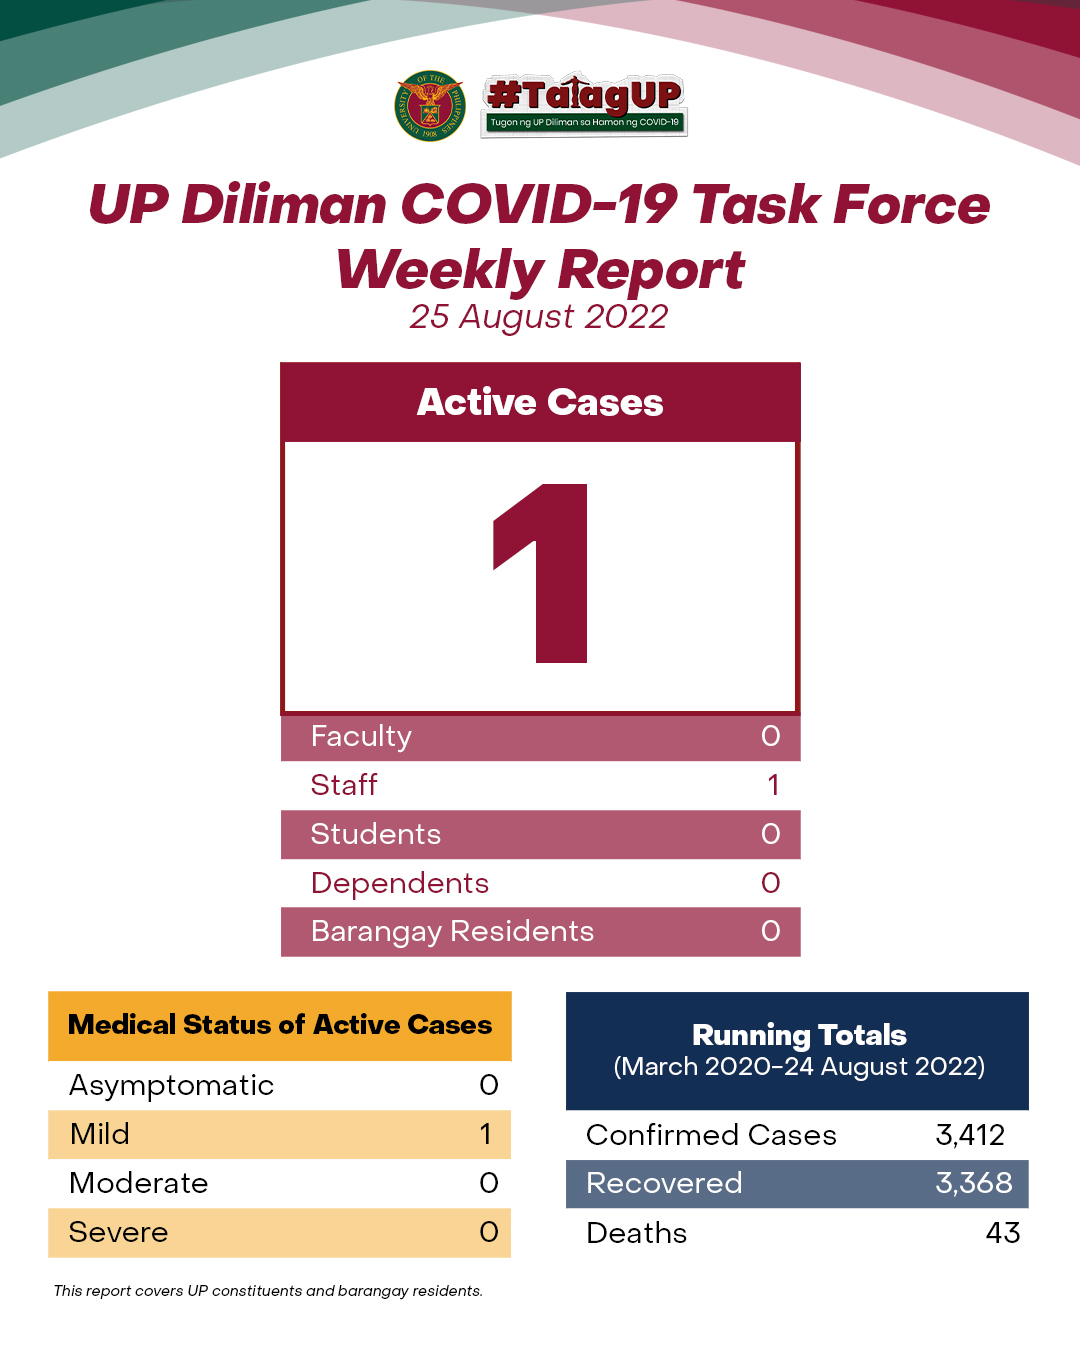 UP Diliman COVID-19 Task Force Weekly Report (25 August 2022)